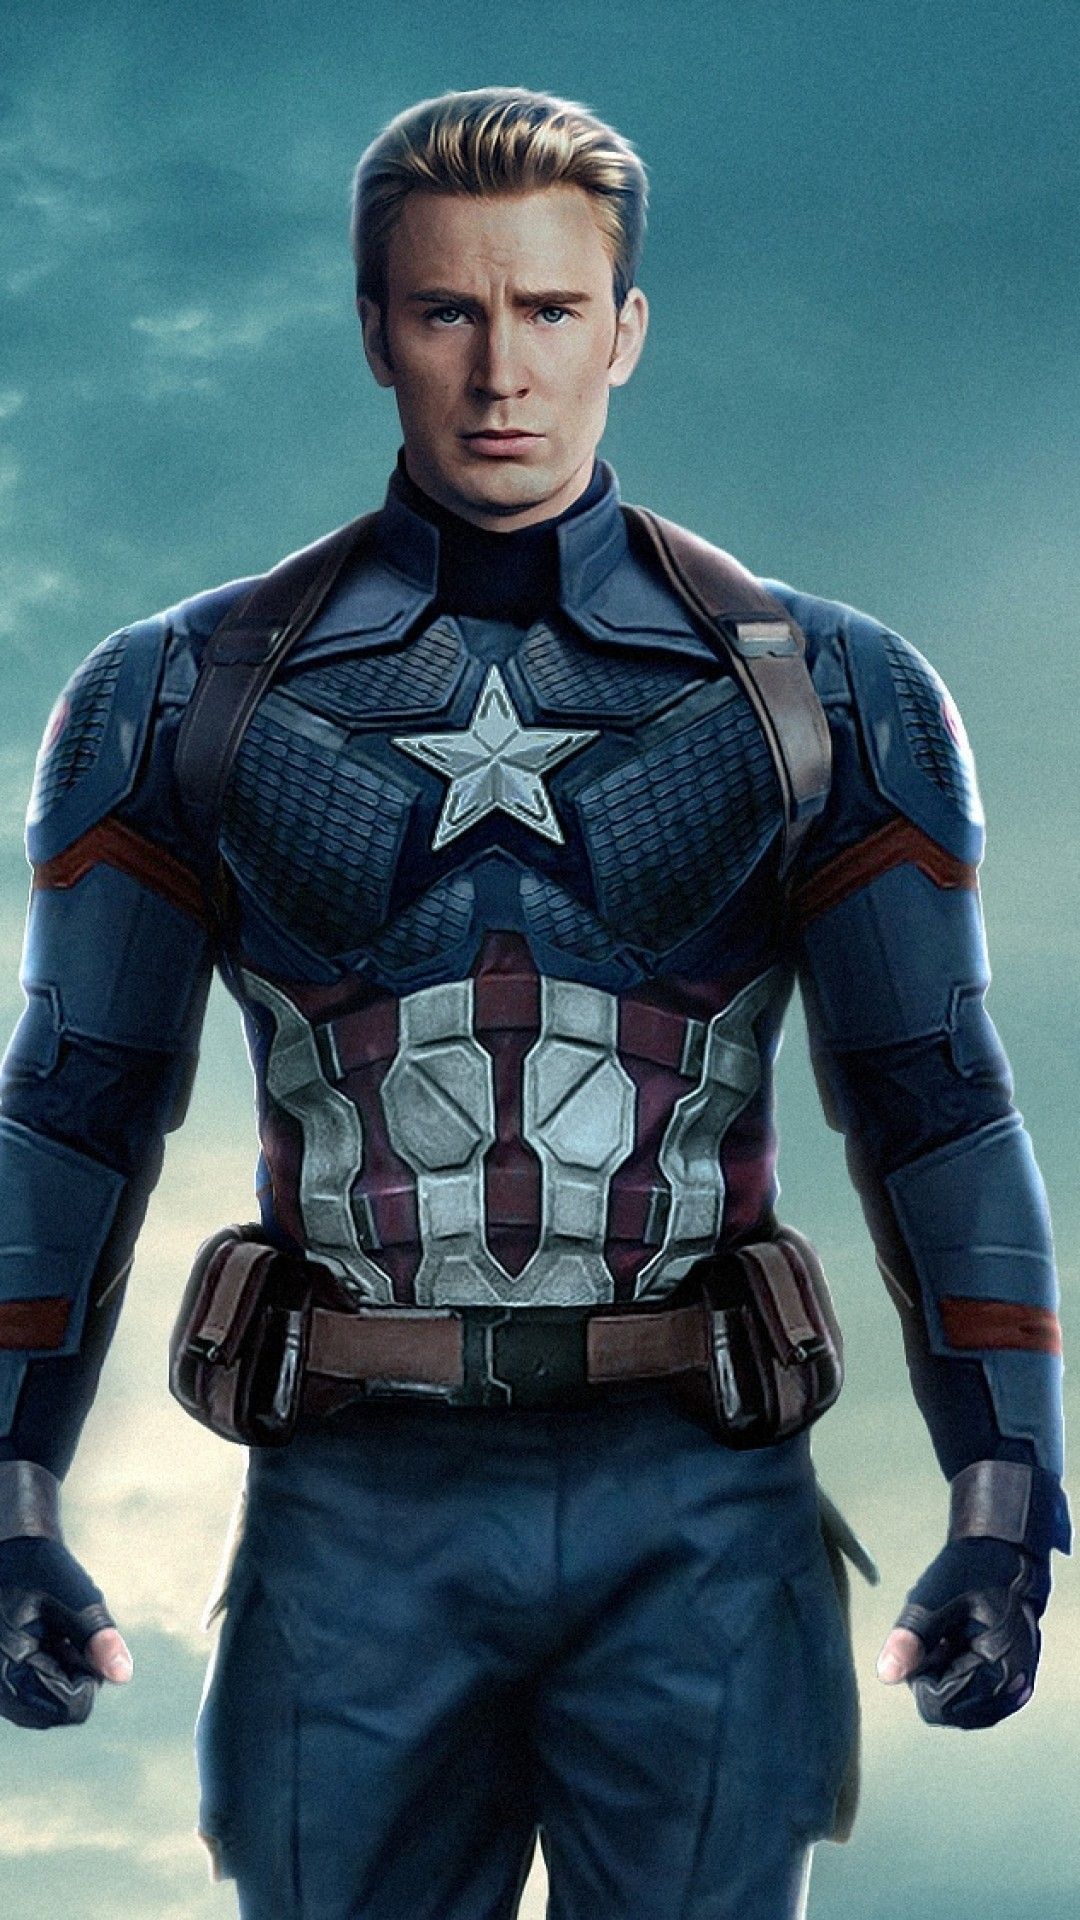 Download 1080x1920 Captain America: The Winter Soldier, Chris Evans Wallpaper for iPhone iPhone 7 Plus, iPhone 6+, Sony Xperia Z, HTC One